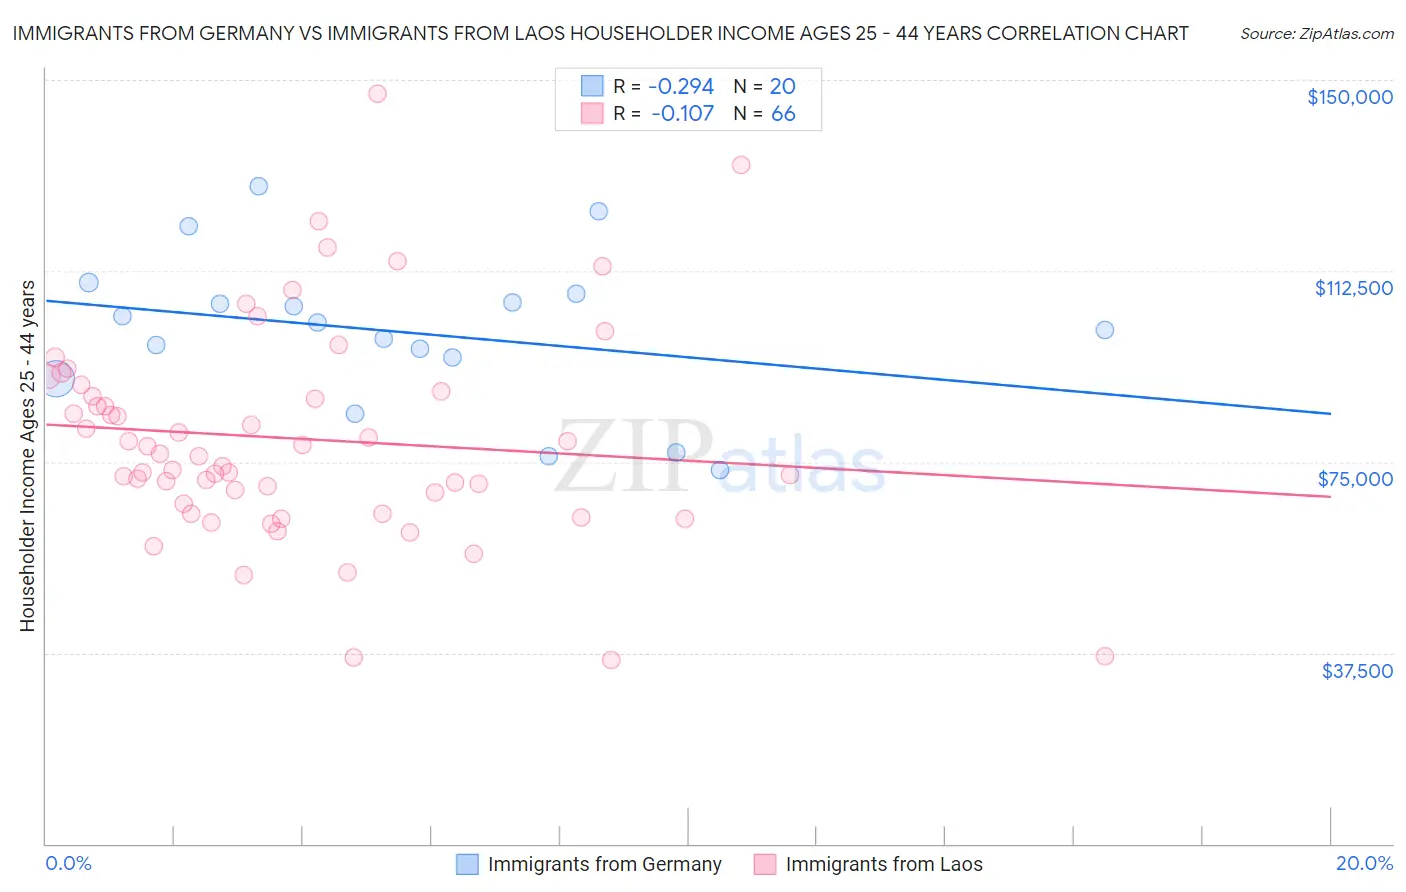 Immigrants from Germany vs Immigrants from Laos Householder Income Ages 25 - 44 years